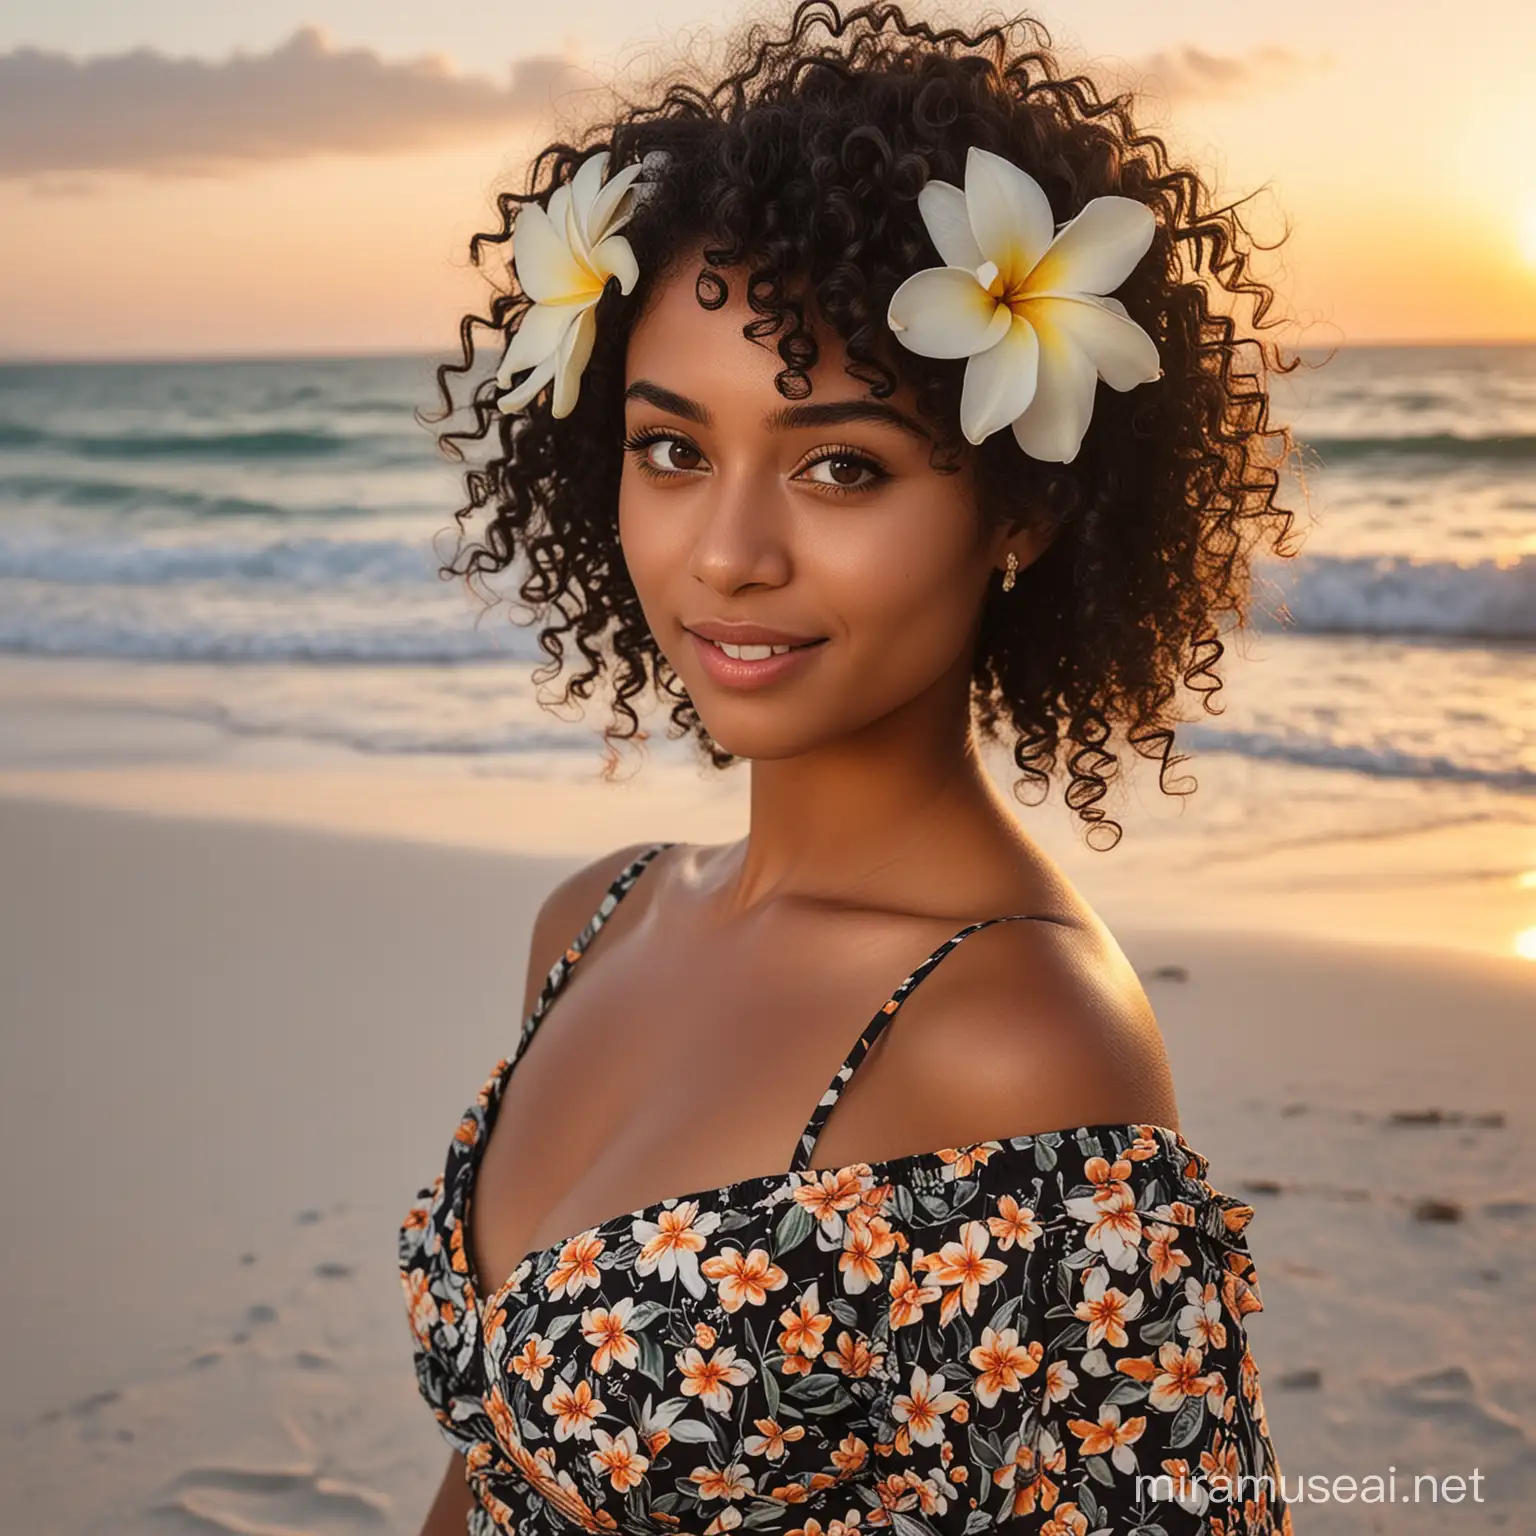 Smiling CurlyHaired Girl Enjoying Sunset on Beach with Frangipani Flower in Hair